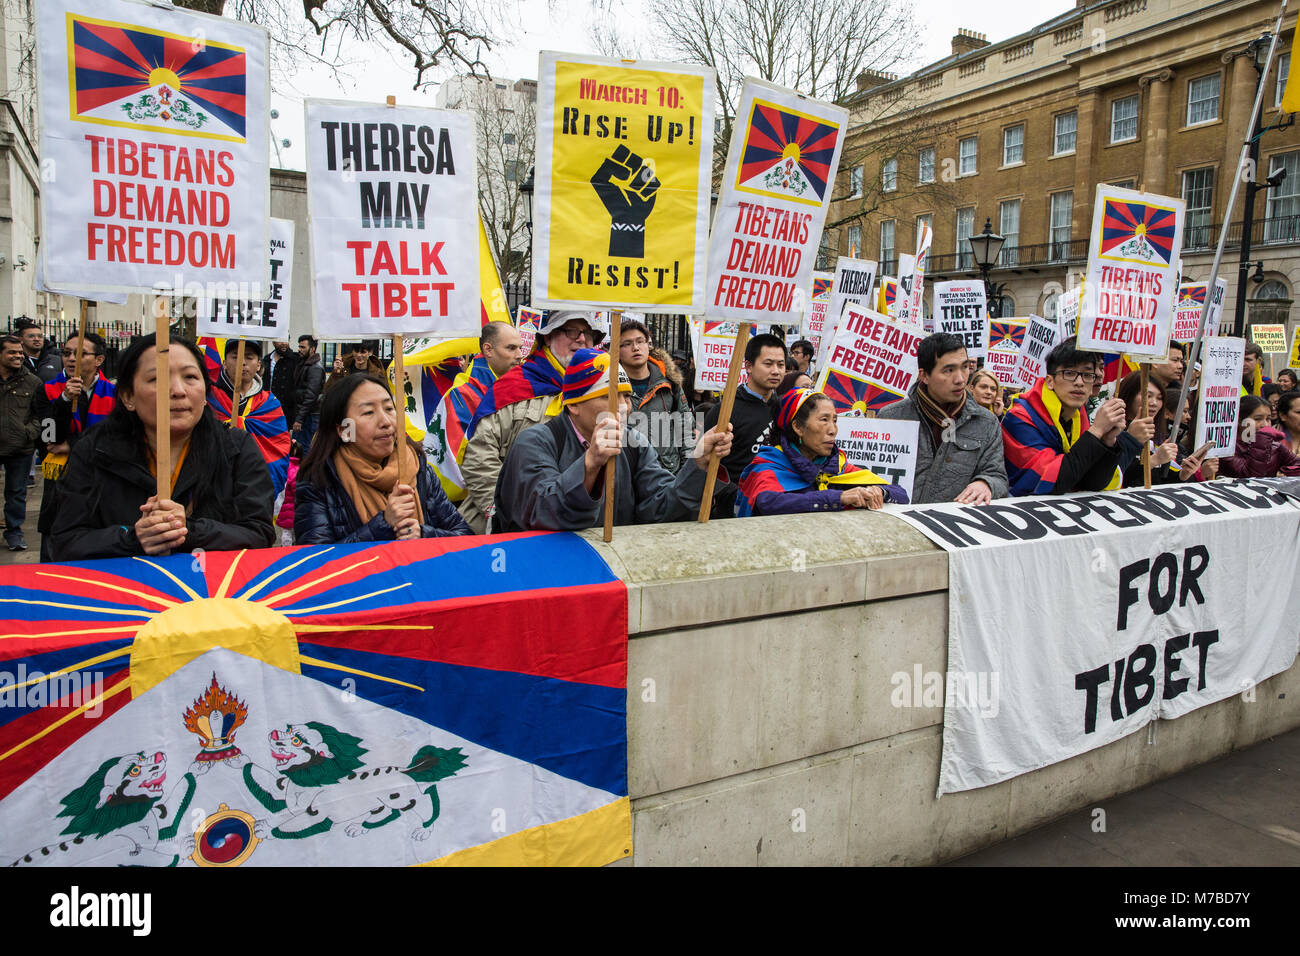 London, UK. 10th March, 2018. Members of the UK's Tibetan community attend the annual Uprising Day rally opposite Downing Street prior to a march to the Chinese embassy. Tibetan Uprising Day, observed on 10th March,  commemorates the 1959 Tibetan uprising against the presence of the People's Republic of China in Tibet. It resulted in a violent crackdown on Tibetan independence movements and the flight of the Dalai Lama into exile. Credit: Mark Kerrison/Alamy Live News Stock Photo